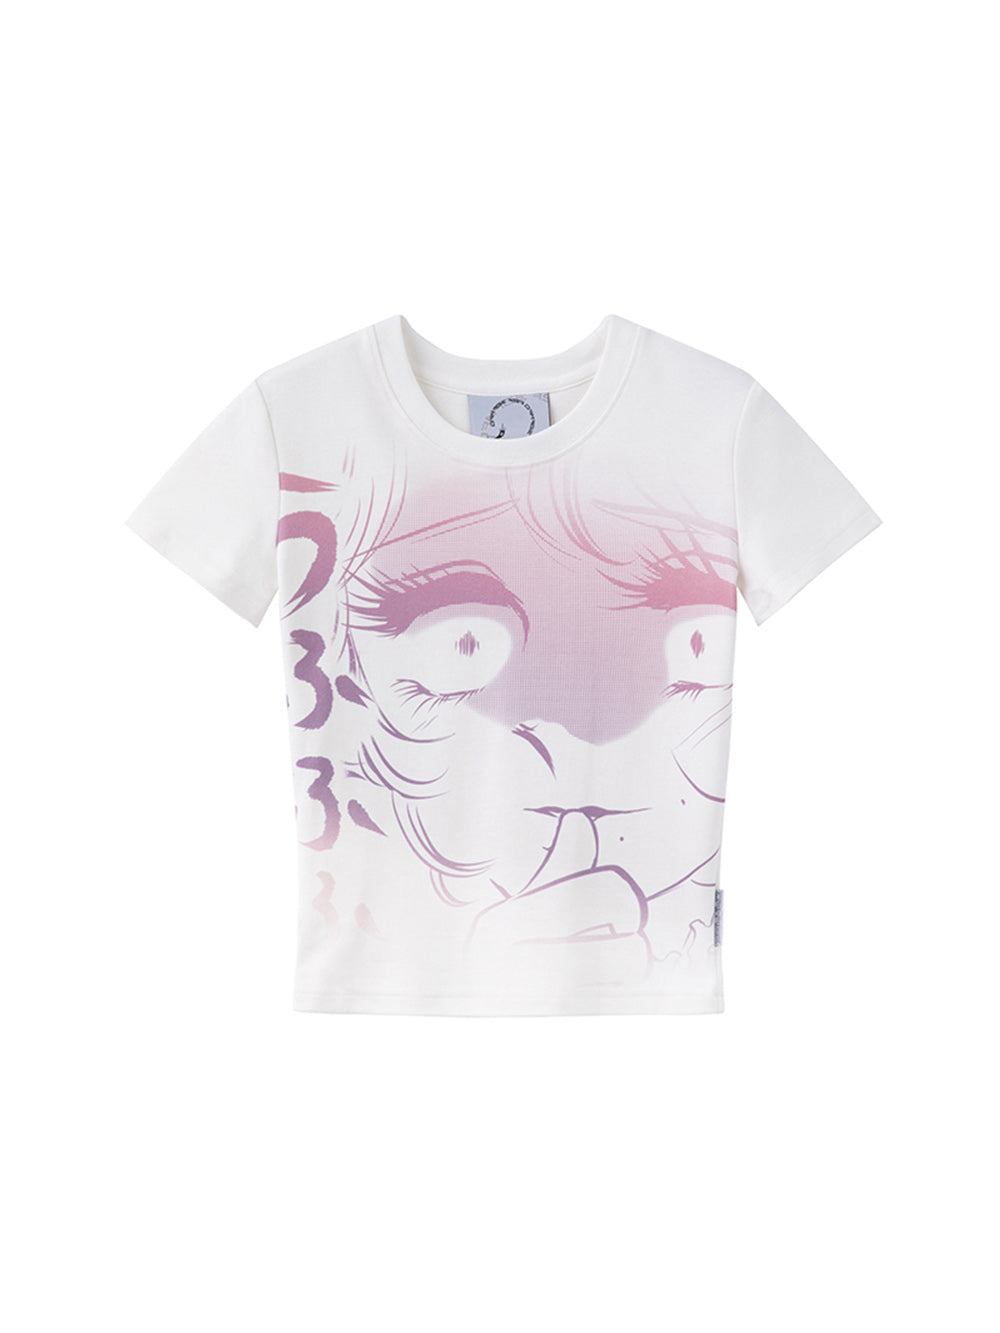 MUKTANK x Damage Asia Fitted T-shirt Featuring A Print of 2D Manga Girl